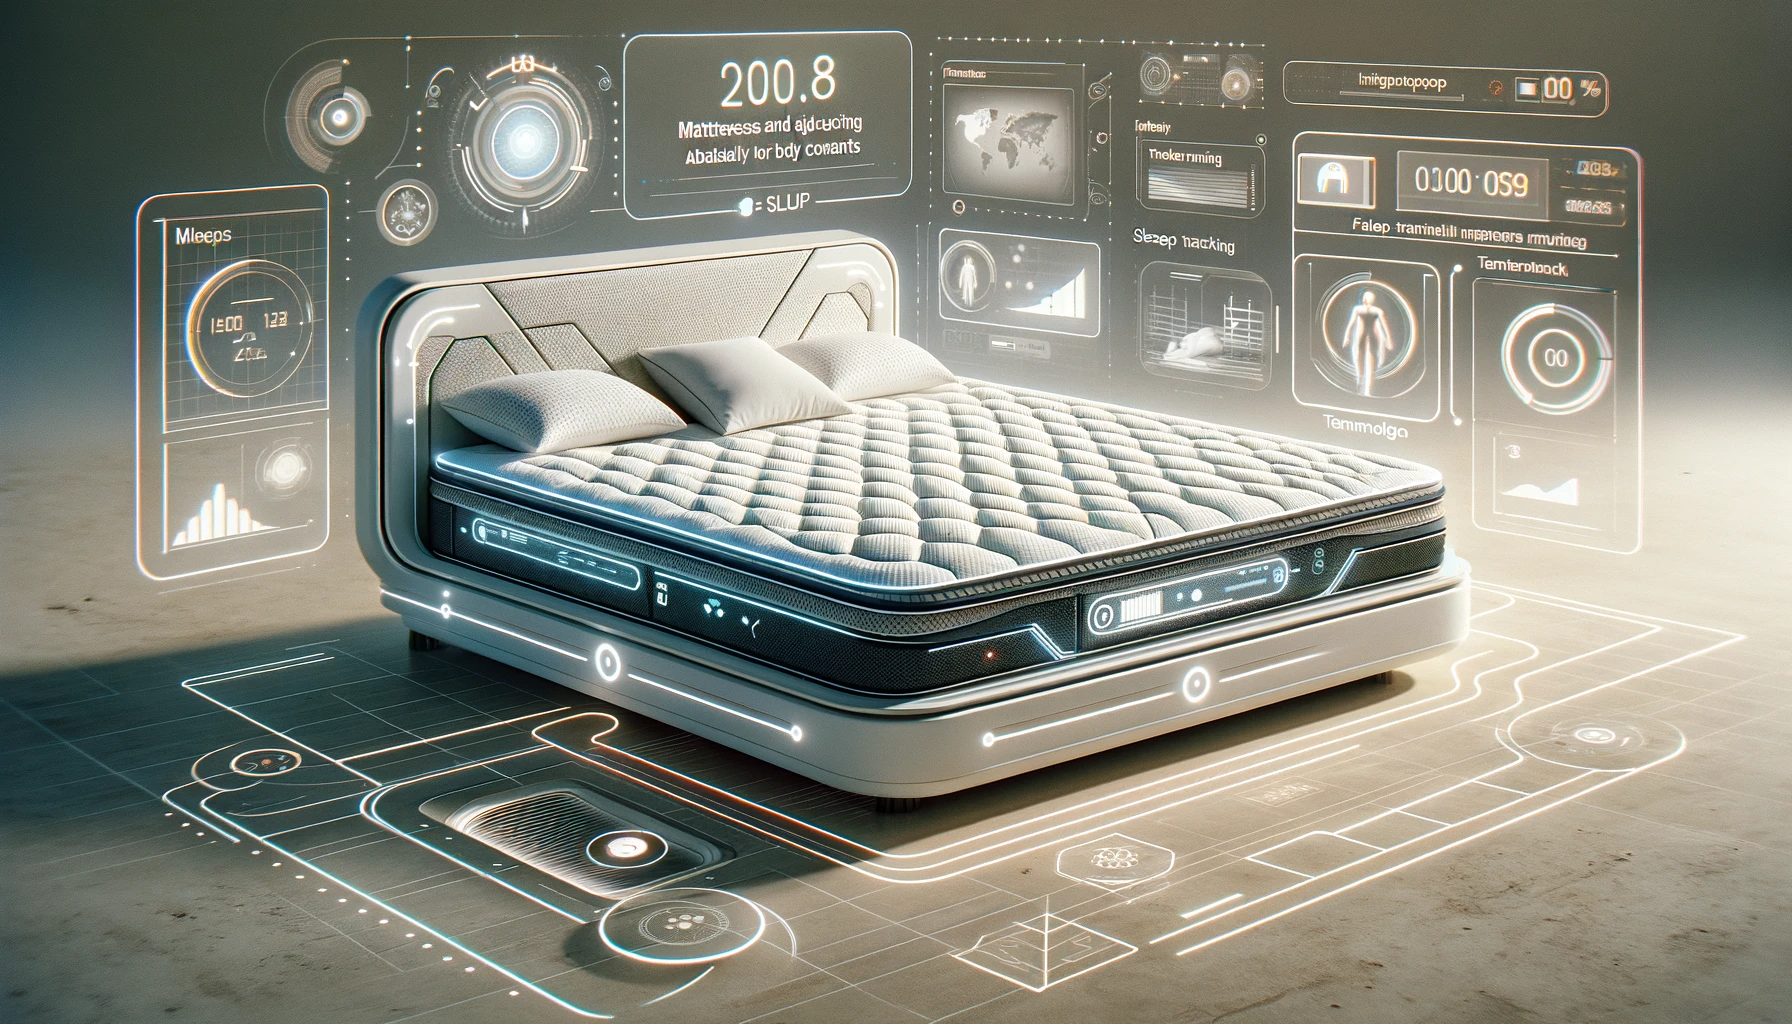 A futuristic and sci-fi styled image depicting the future trends in sleep technology. The scene includes advanced, high-tech mattresses with features like smart sensors, AI integration, and innovative materials.